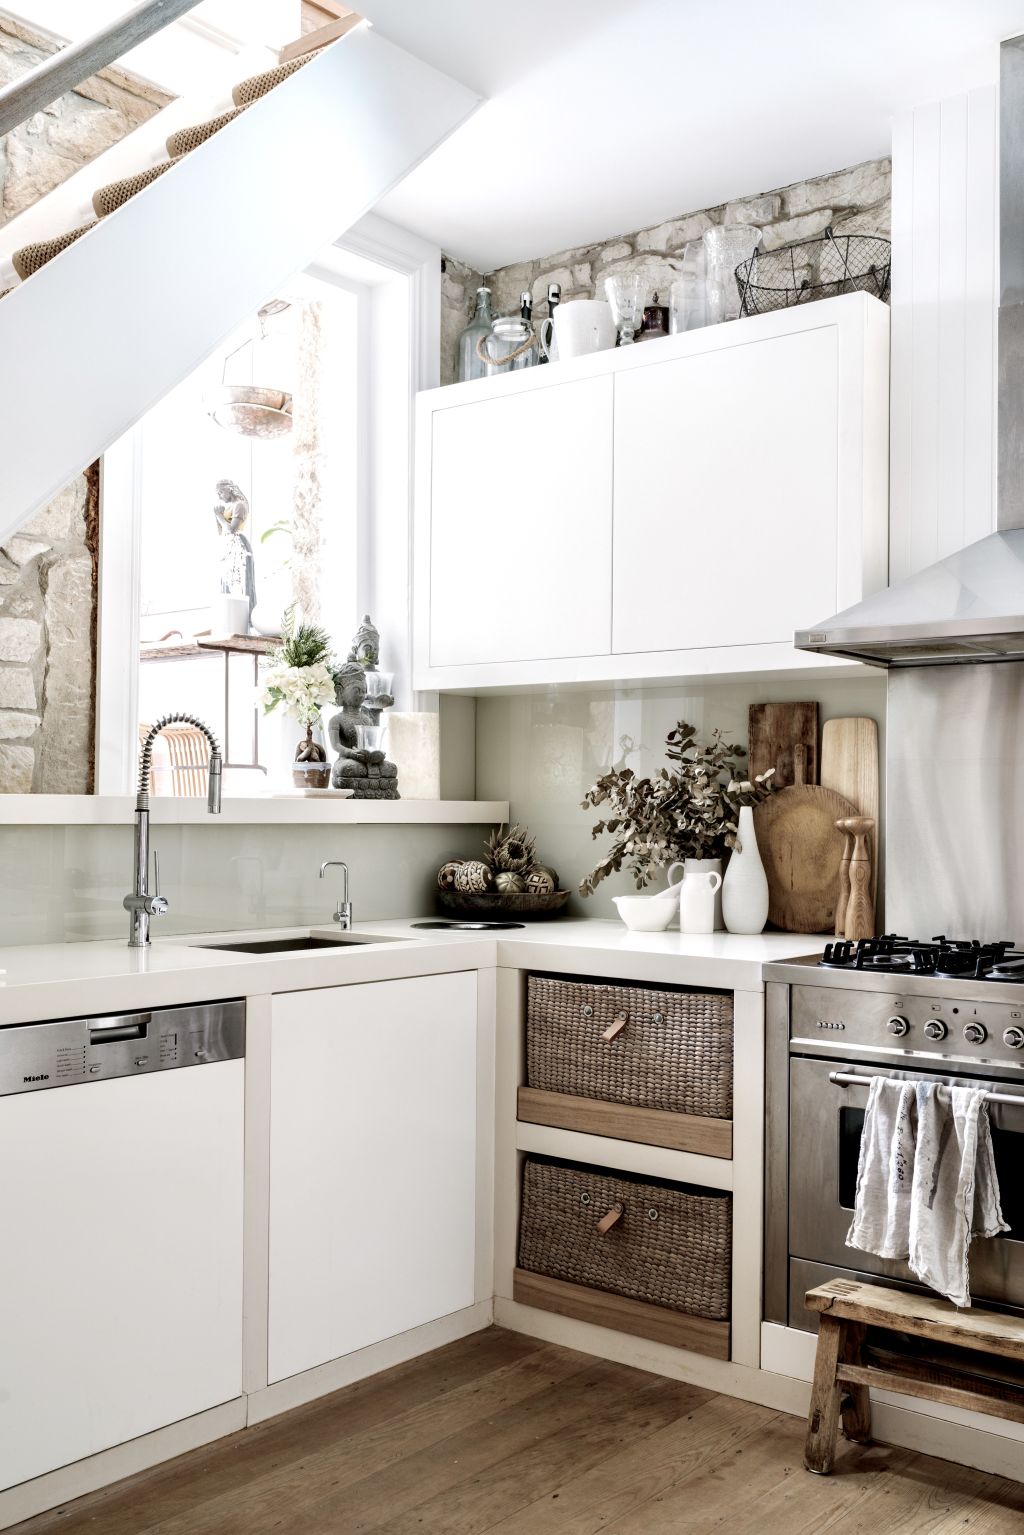 This remarkable home was formerly a workers’ cottage, built in the 1860s.  Photo: Marnie Hawson